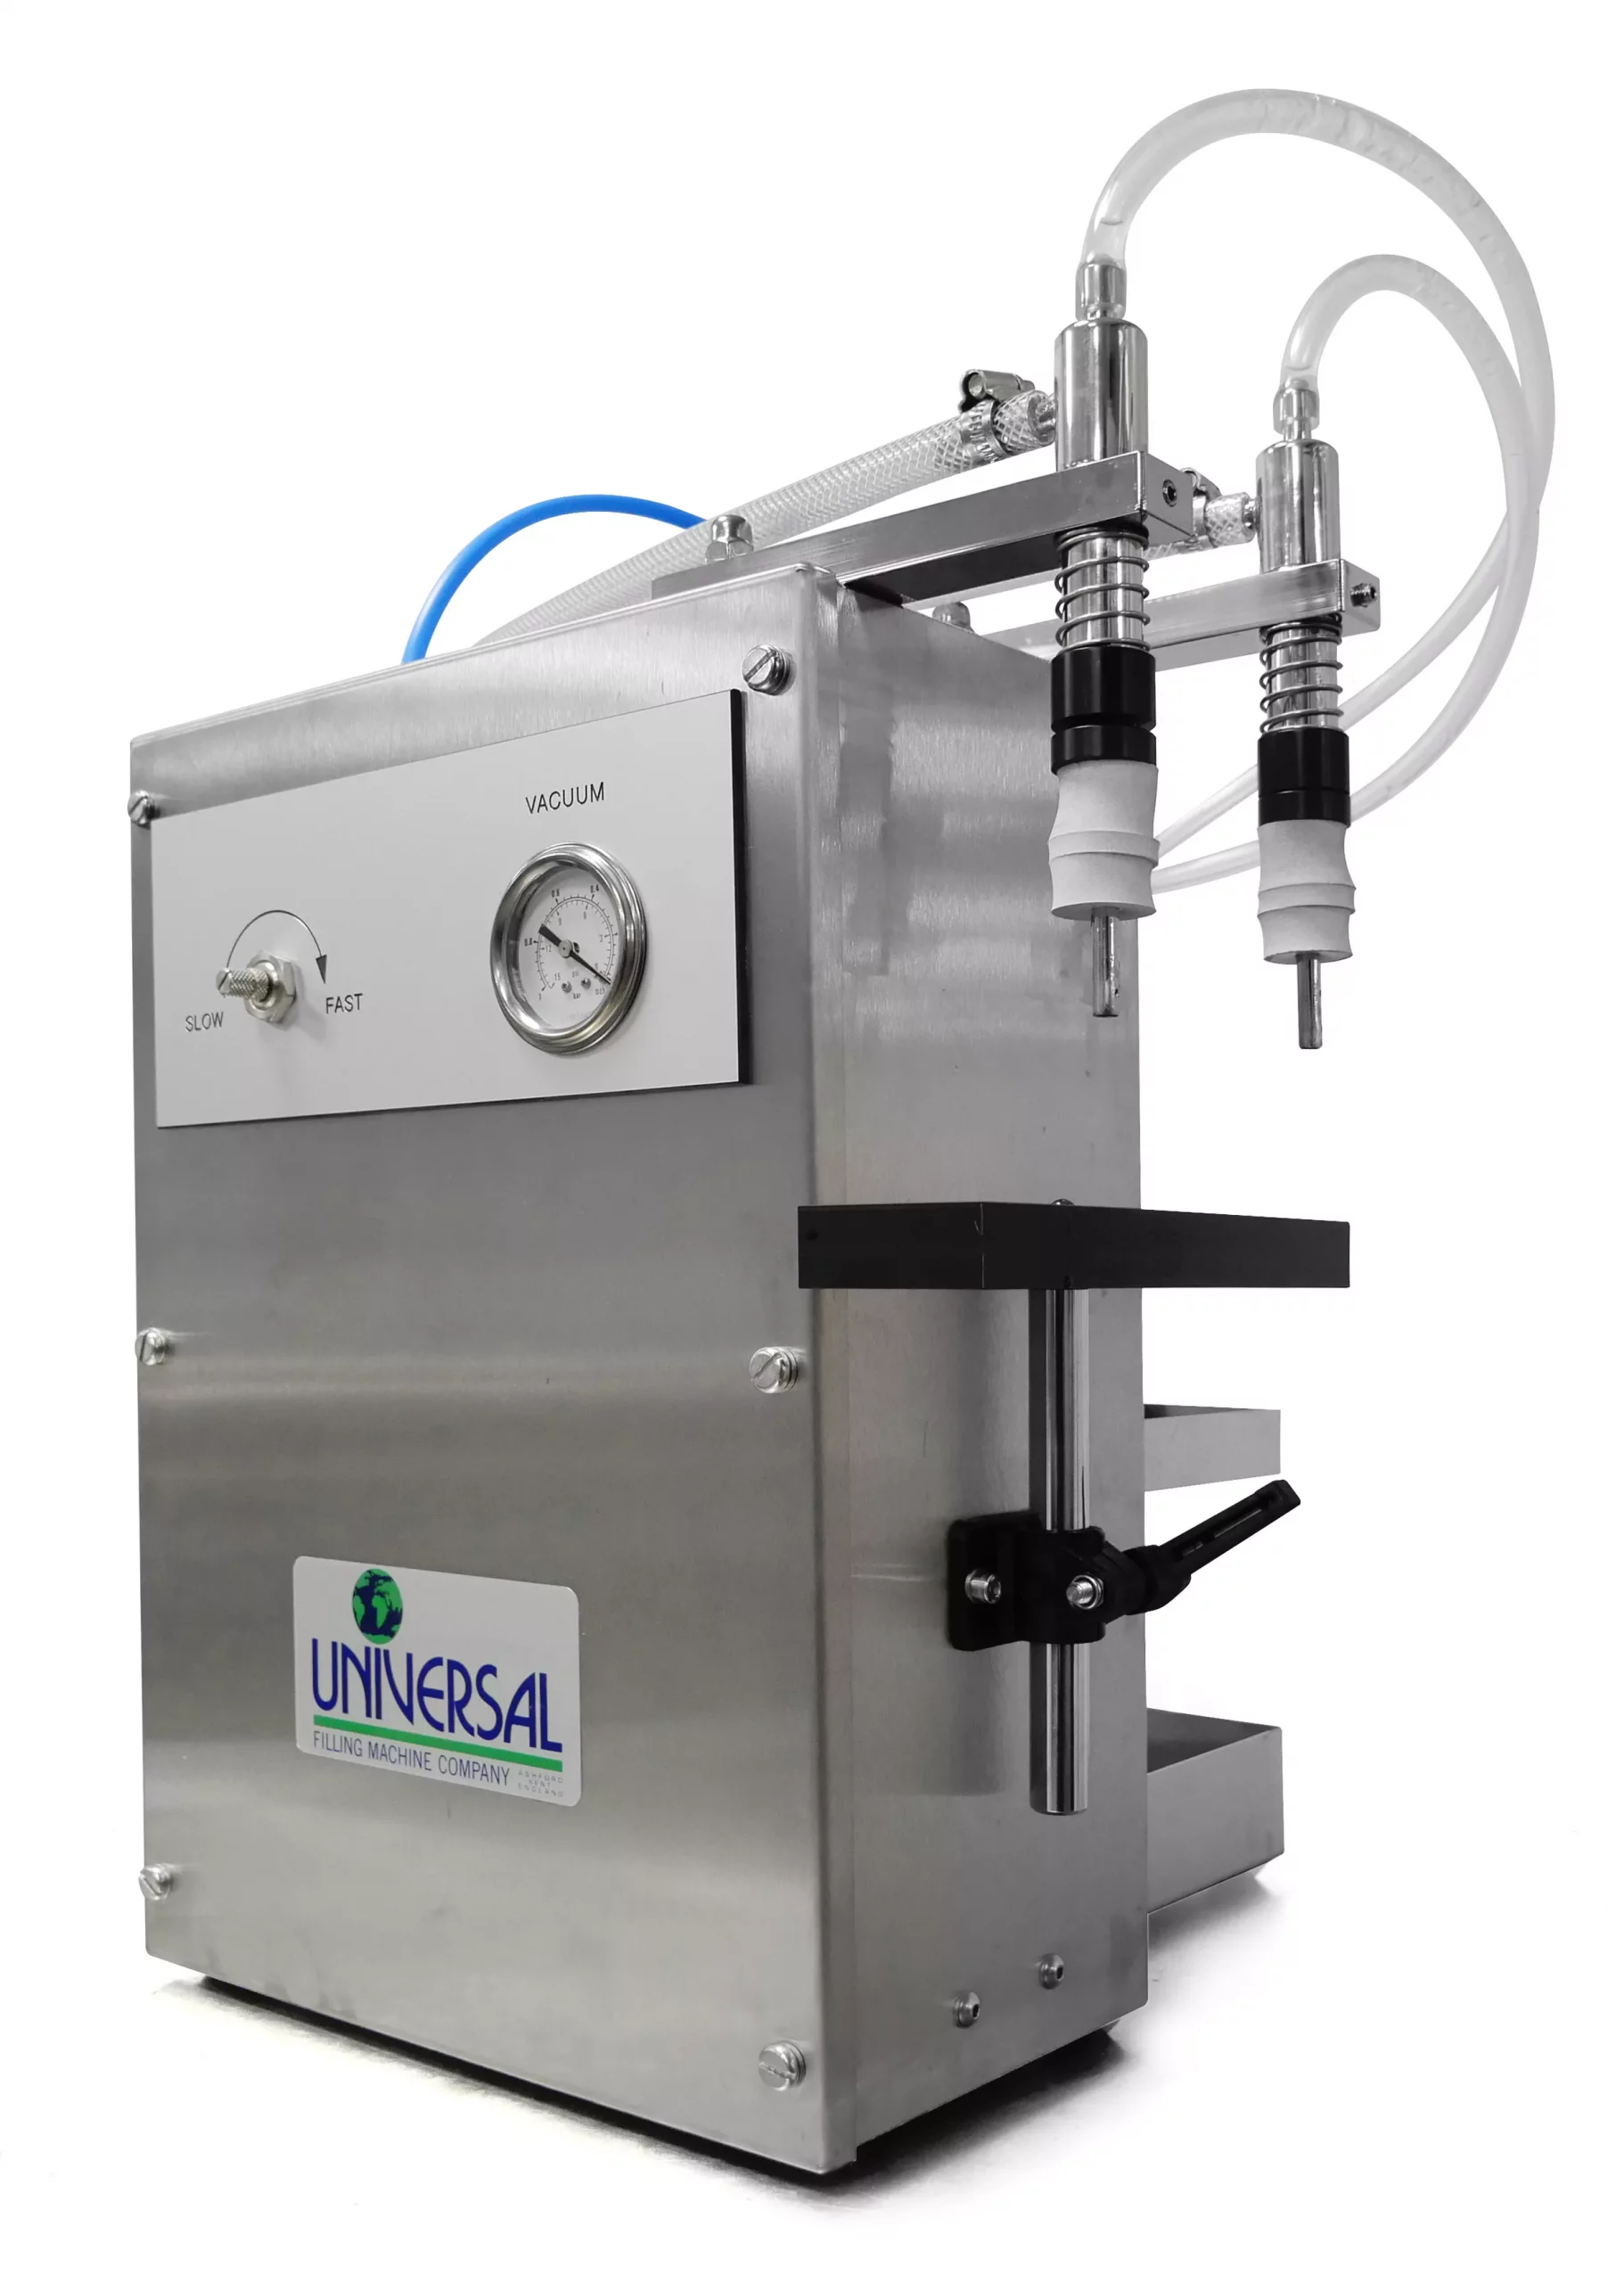 Vacufill - liquid filling machine from Universal Filling Machine Co